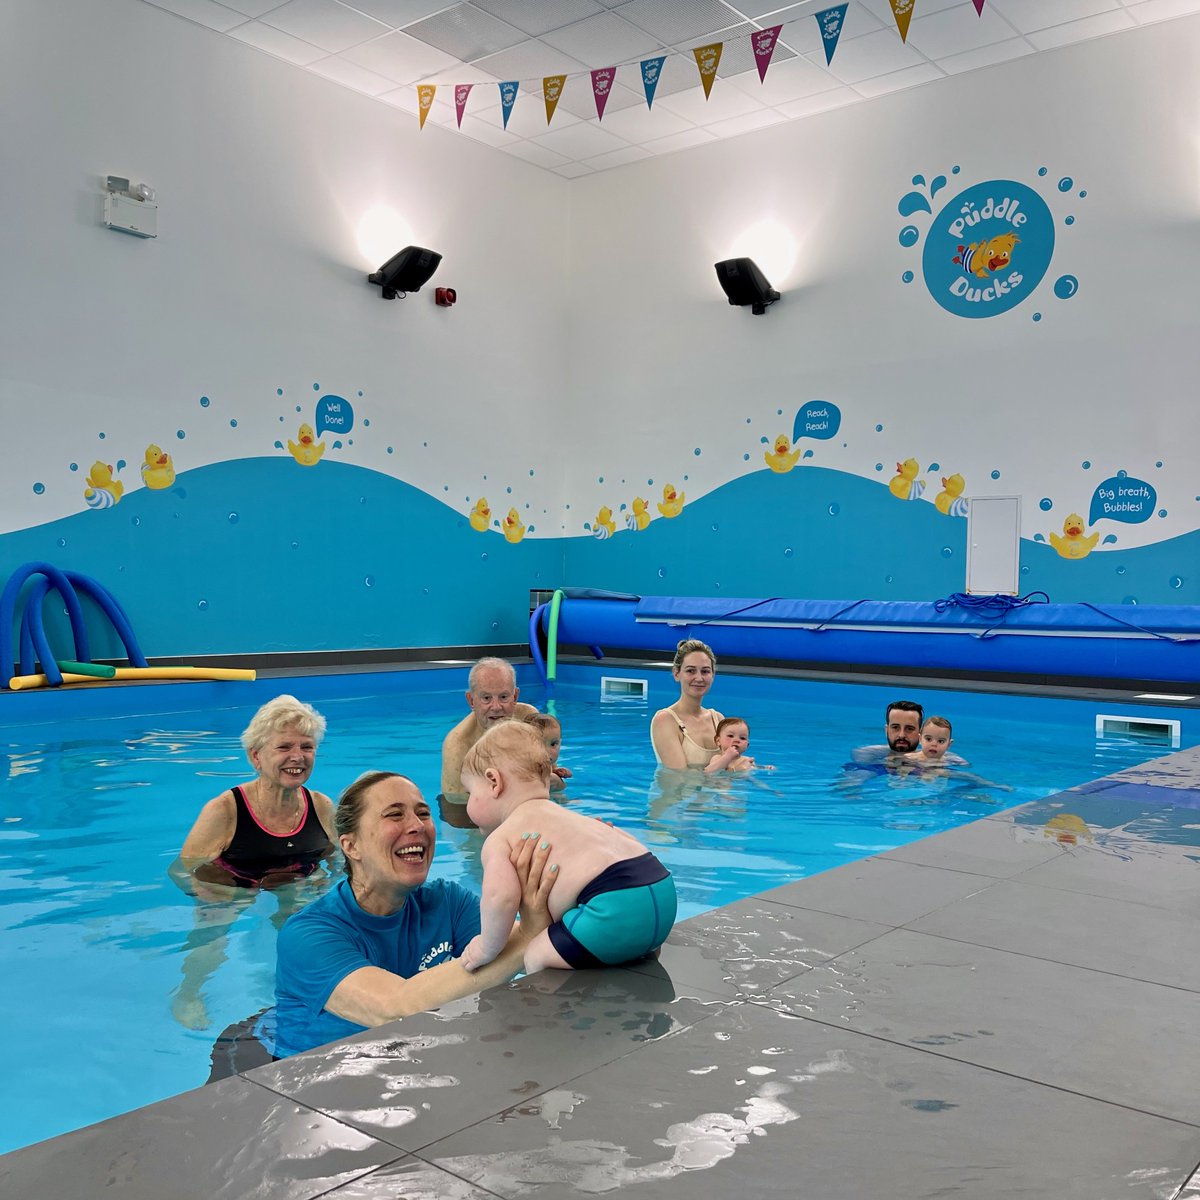 We floated into the wonderful world of Puddle Ducks baby swim classes and saw Floaties, Splashers and Kickers.

Puddle Ducks swim classes start from birth till 10 years old!  Want to test the waters?  Puddle Ducks offers no-obligation free taster sessions. 🐥

#Northwich